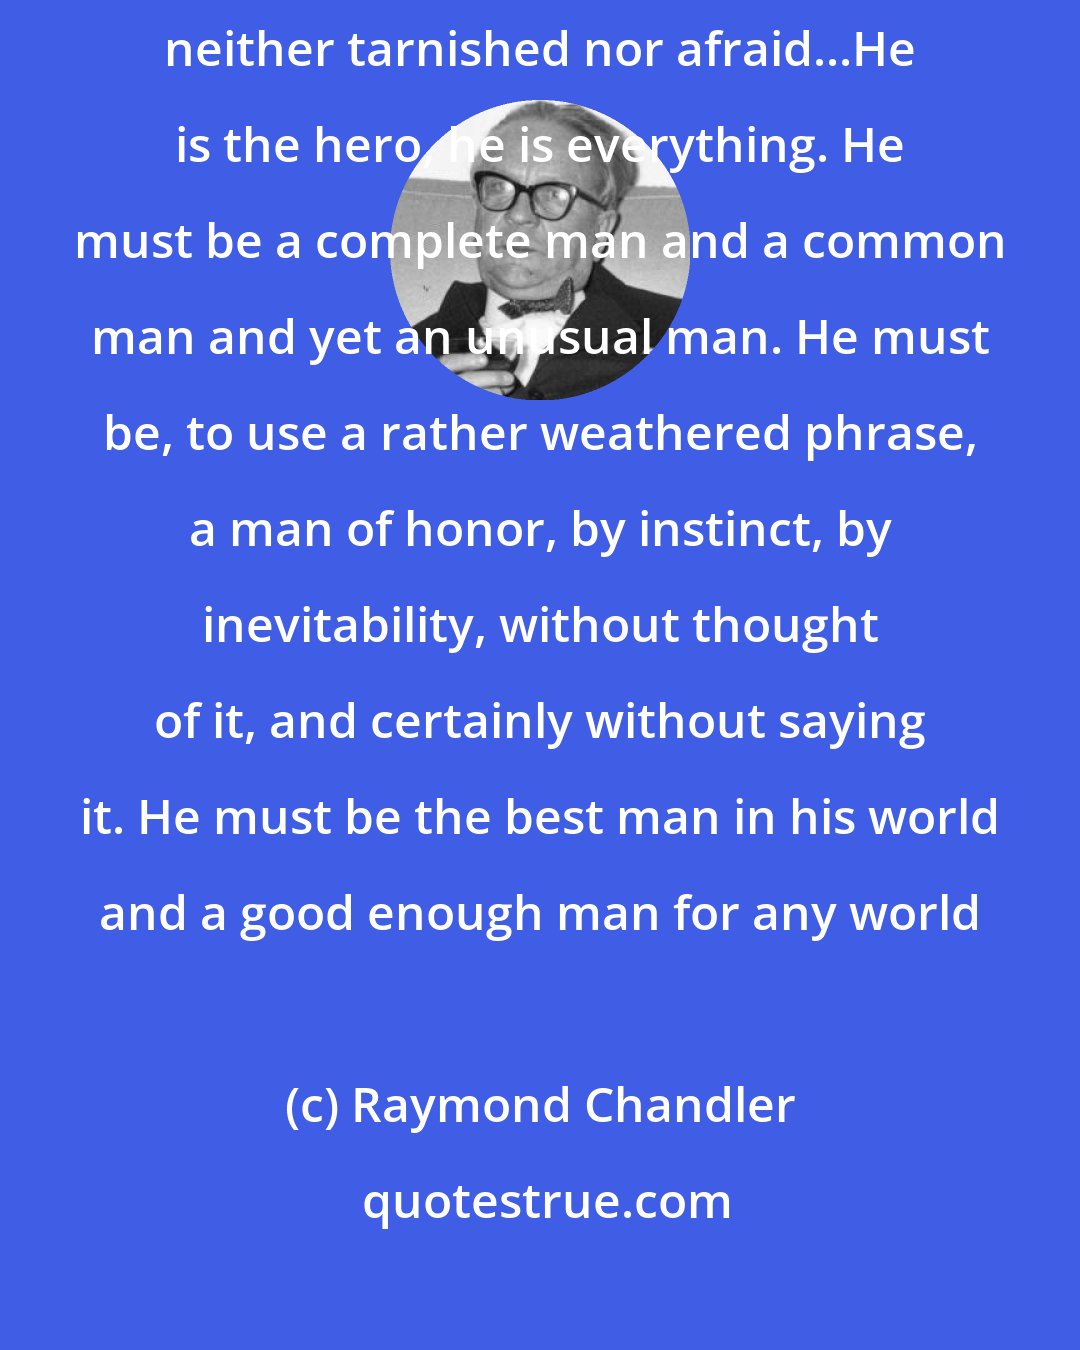 Raymond Chandler: Down these mean streets a man must go who is not himself mean, who is neither tarnished nor afraid...He is the hero, he is everything. He must be a complete man and a common man and yet an unusual man. He must be, to use a rather weathered phrase, a man of honor, by instinct, by inevitability, without thought of it, and certainly without saying it. He must be the best man in his world and a good enough man for any world